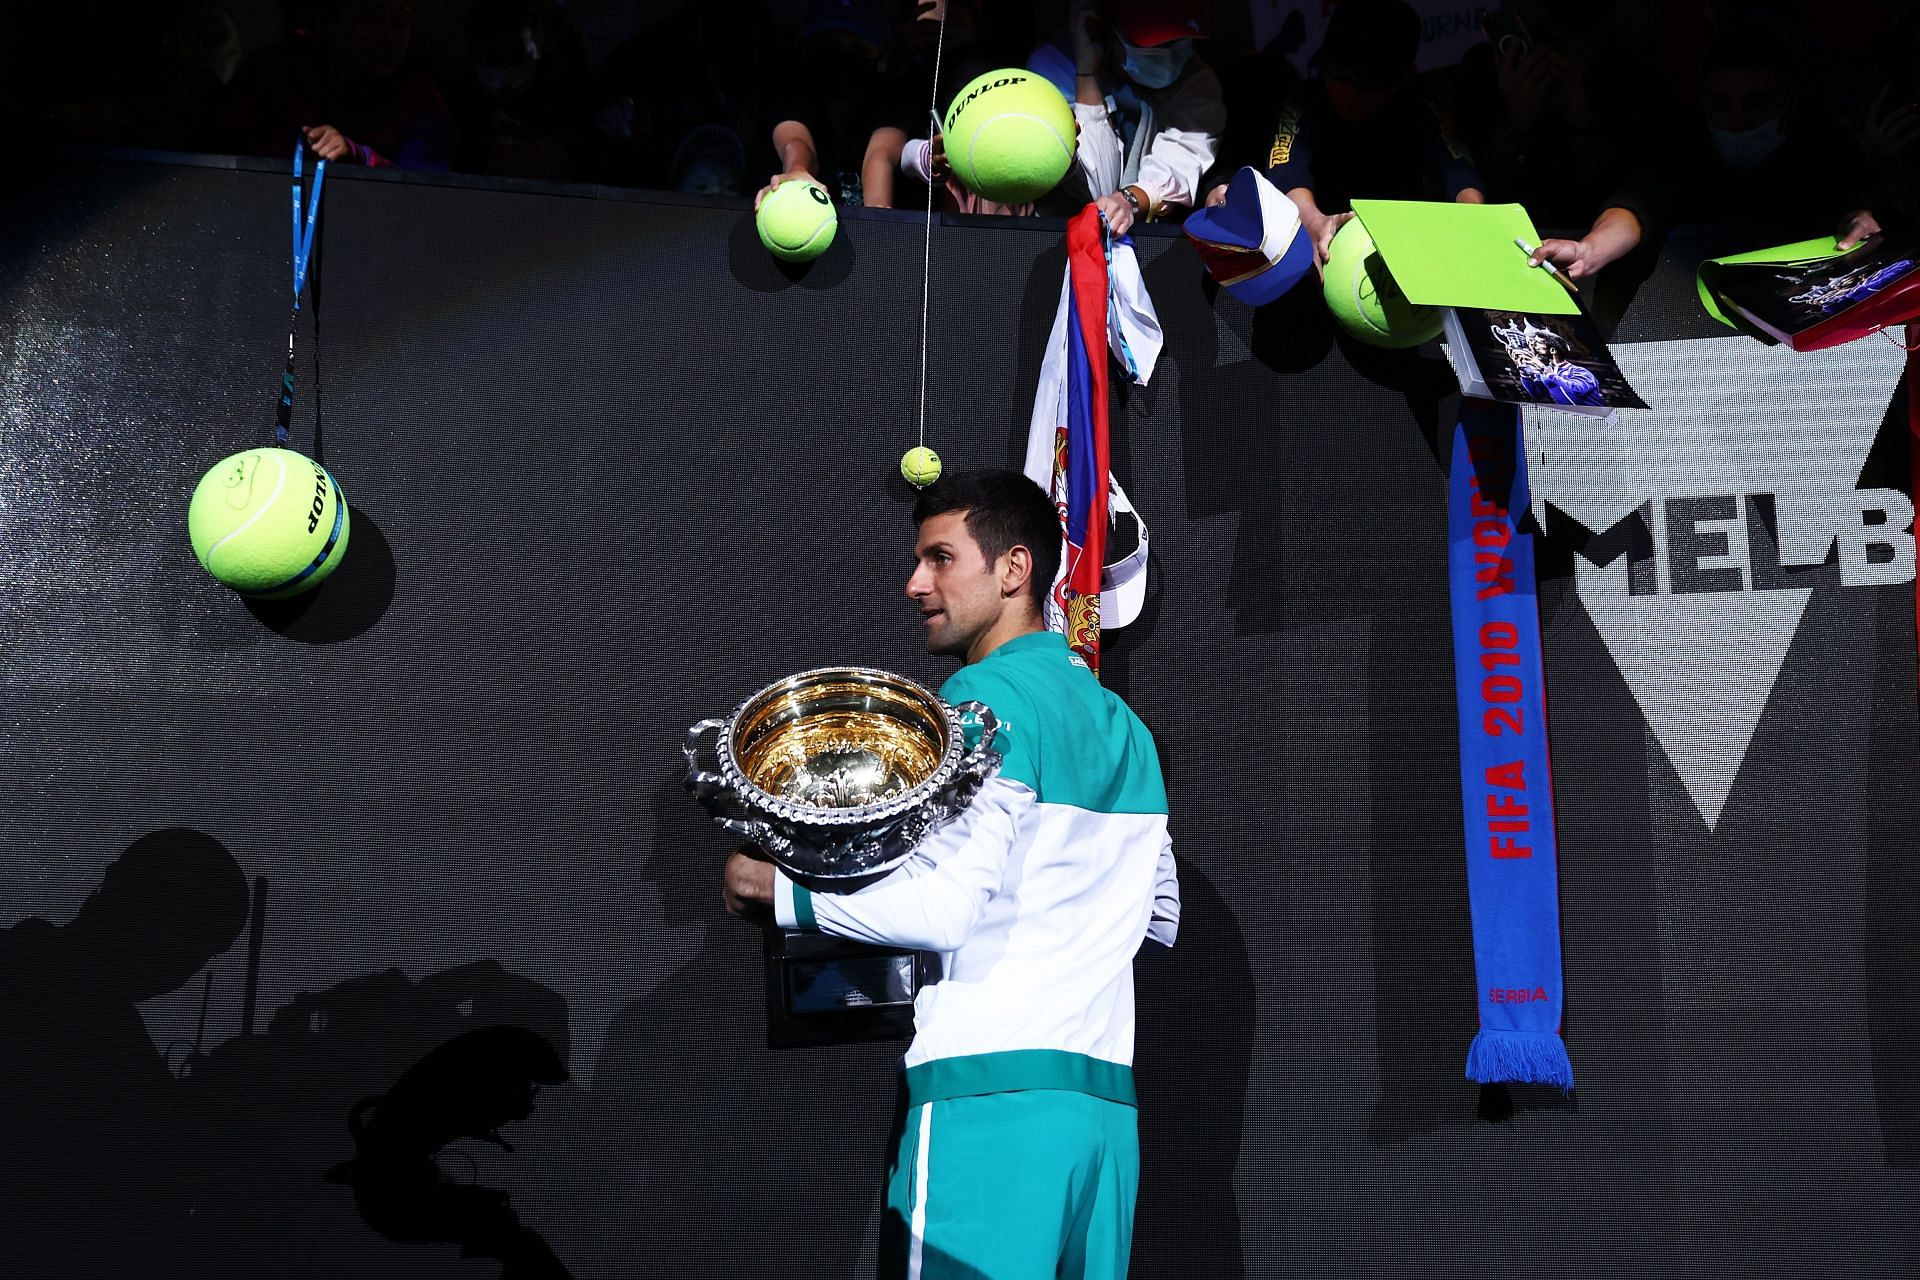 Novak Djokovic will be looking to win a tenth Australian Open title this year